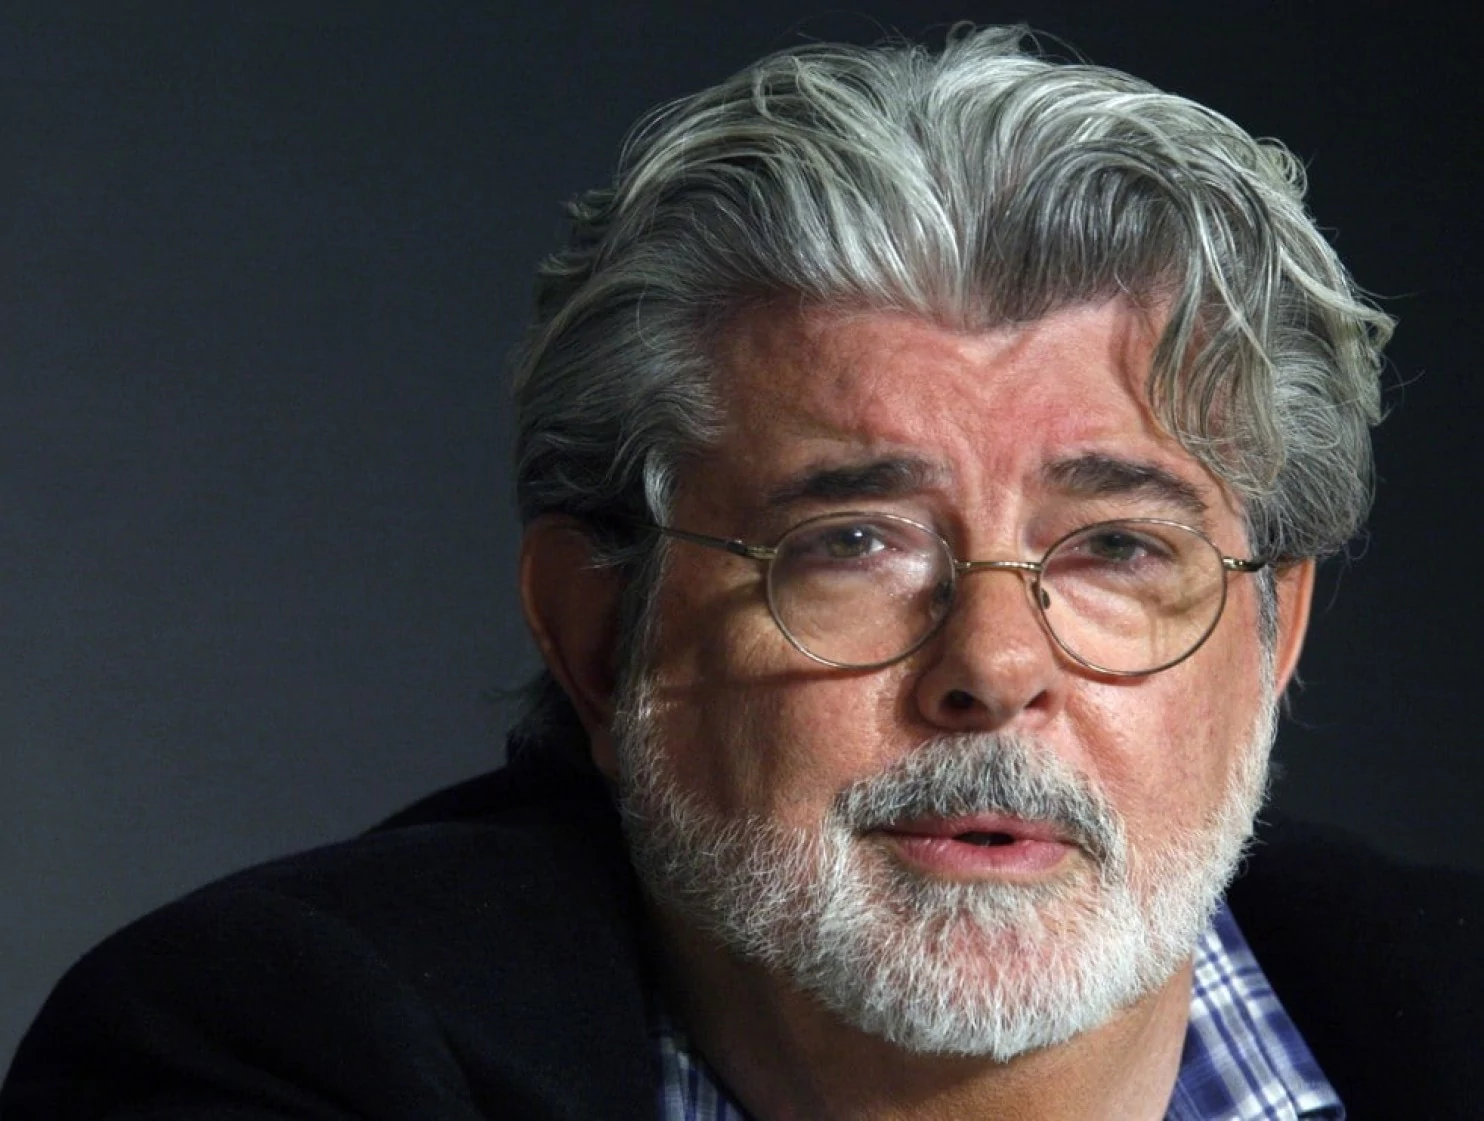 George Lucas George Lucas wants to build affordable housing on his land